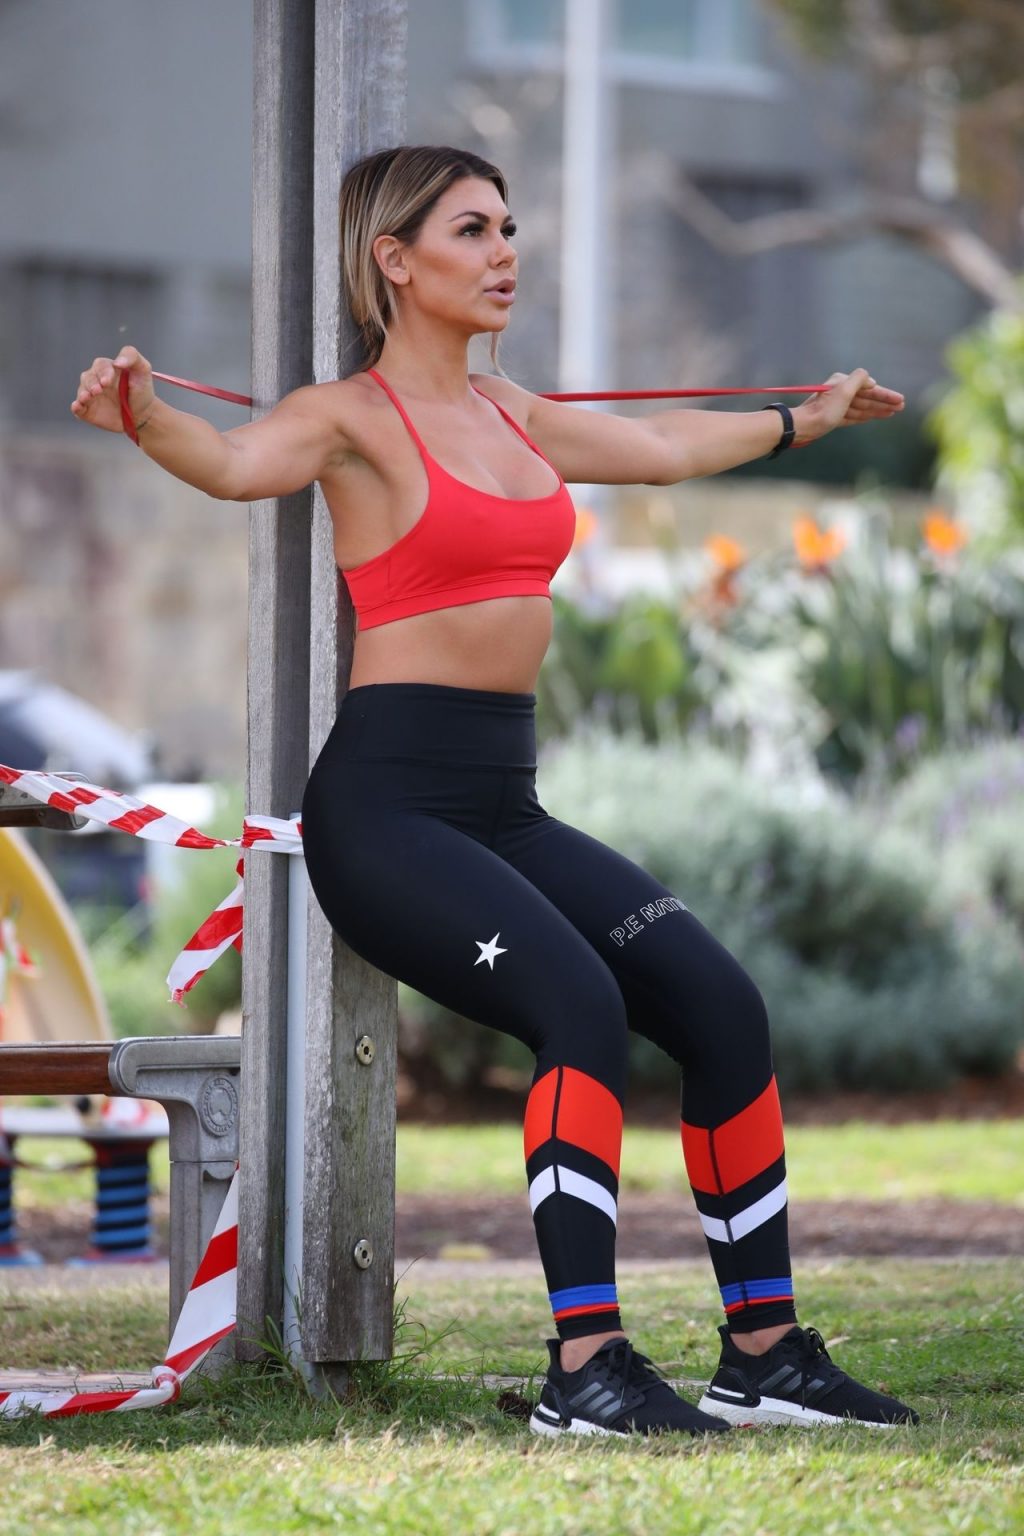 Kirralee Morris Was Pictured Working Out in a Park in North Bondi (82 Photos)